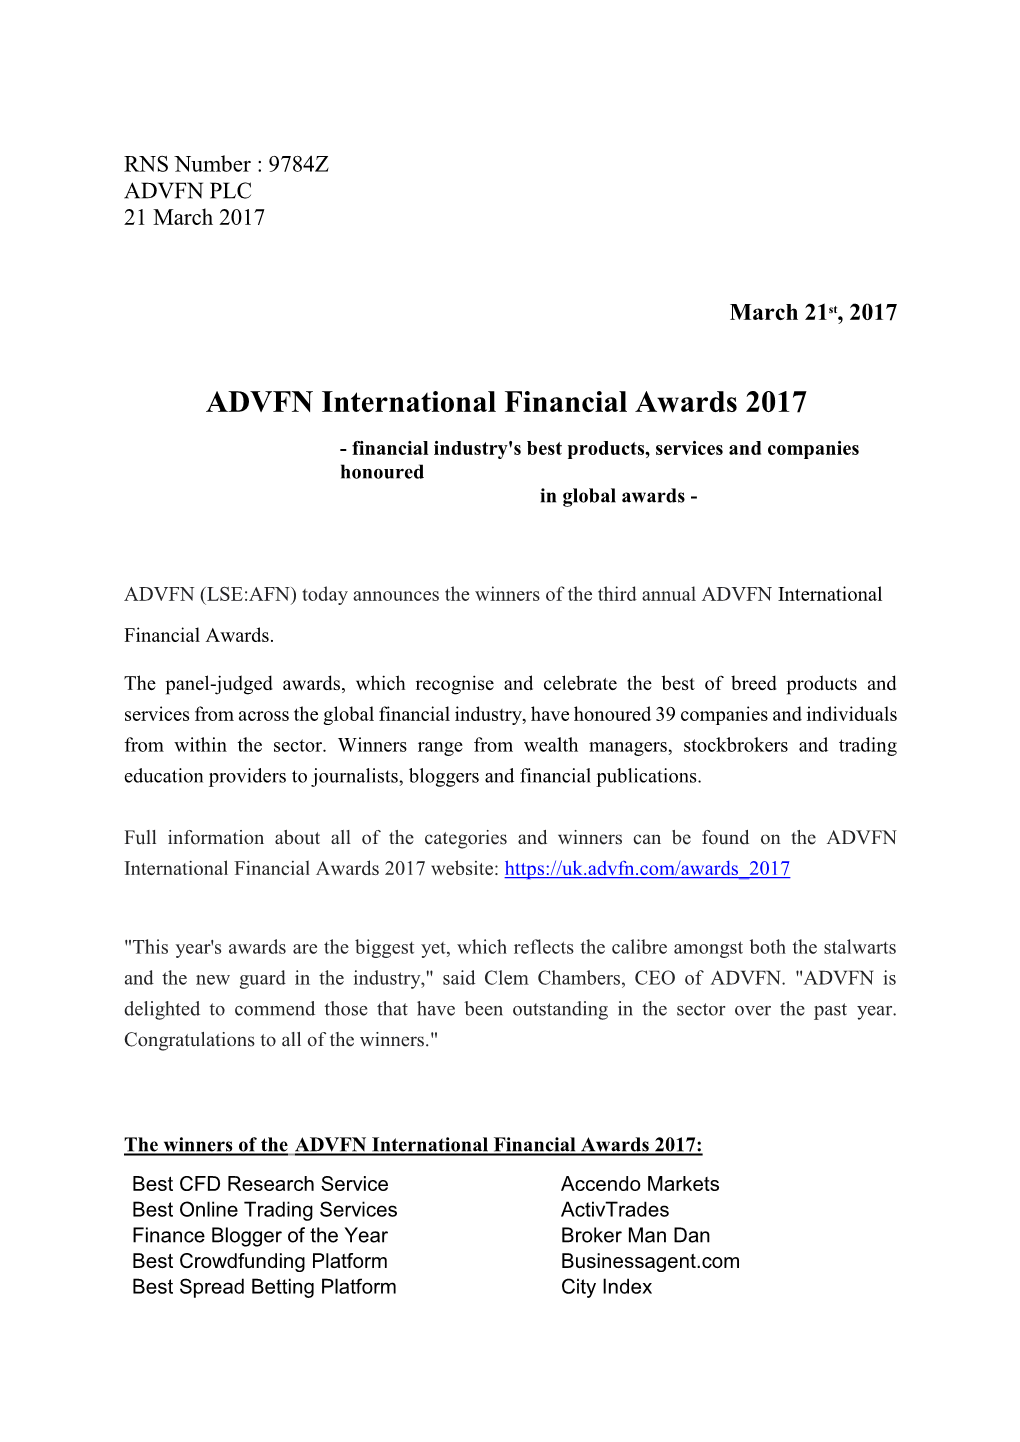 ADVFN International Financial Awards 2017 - Financial Industry's Best Products, Services and Companies Honoured in Global Awards